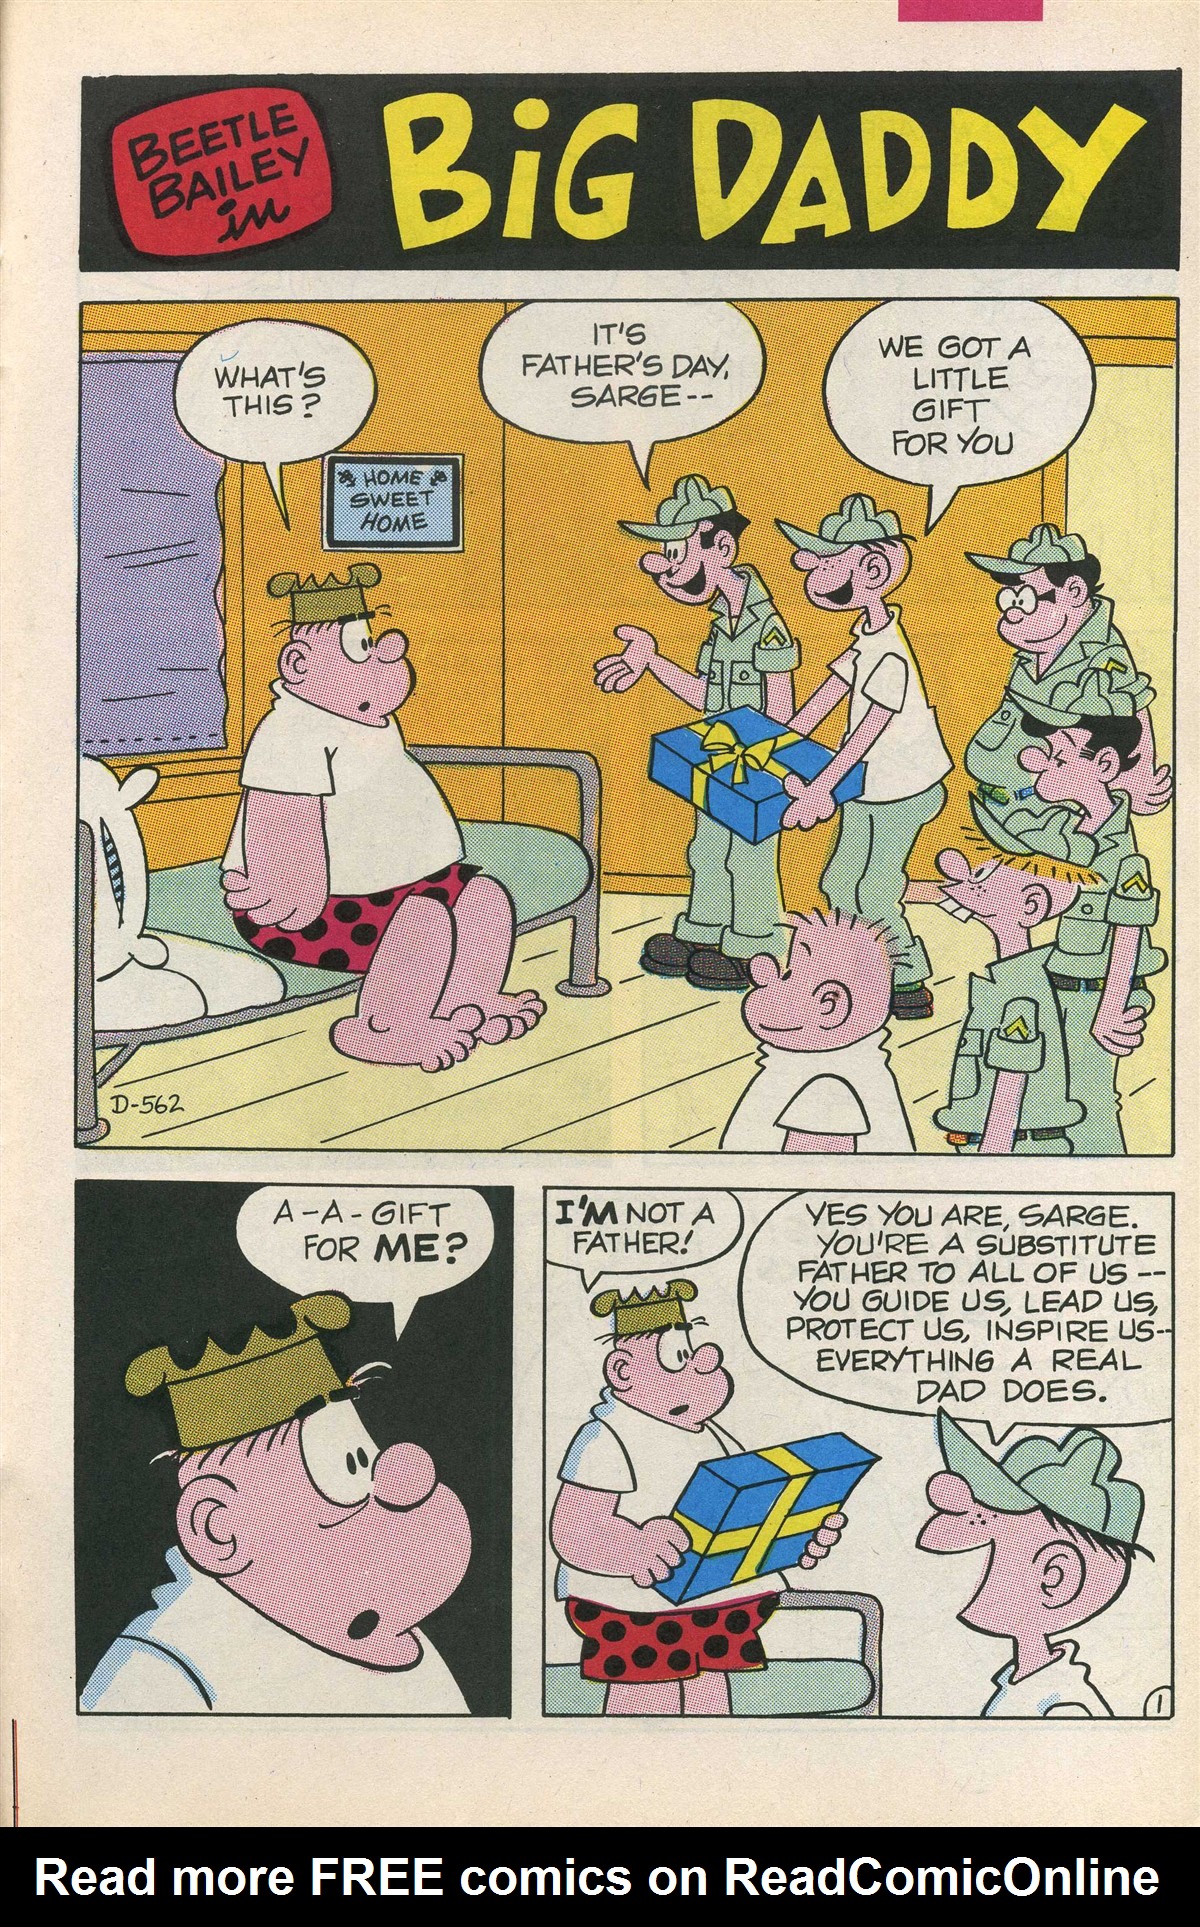 Beetle Bailey Issue 3 | Read Beetle Bailey Issue 3 comic online in high  quality. Read Full Comic online for free - Read comics online in high  quality .| READ COMIC ONLINE